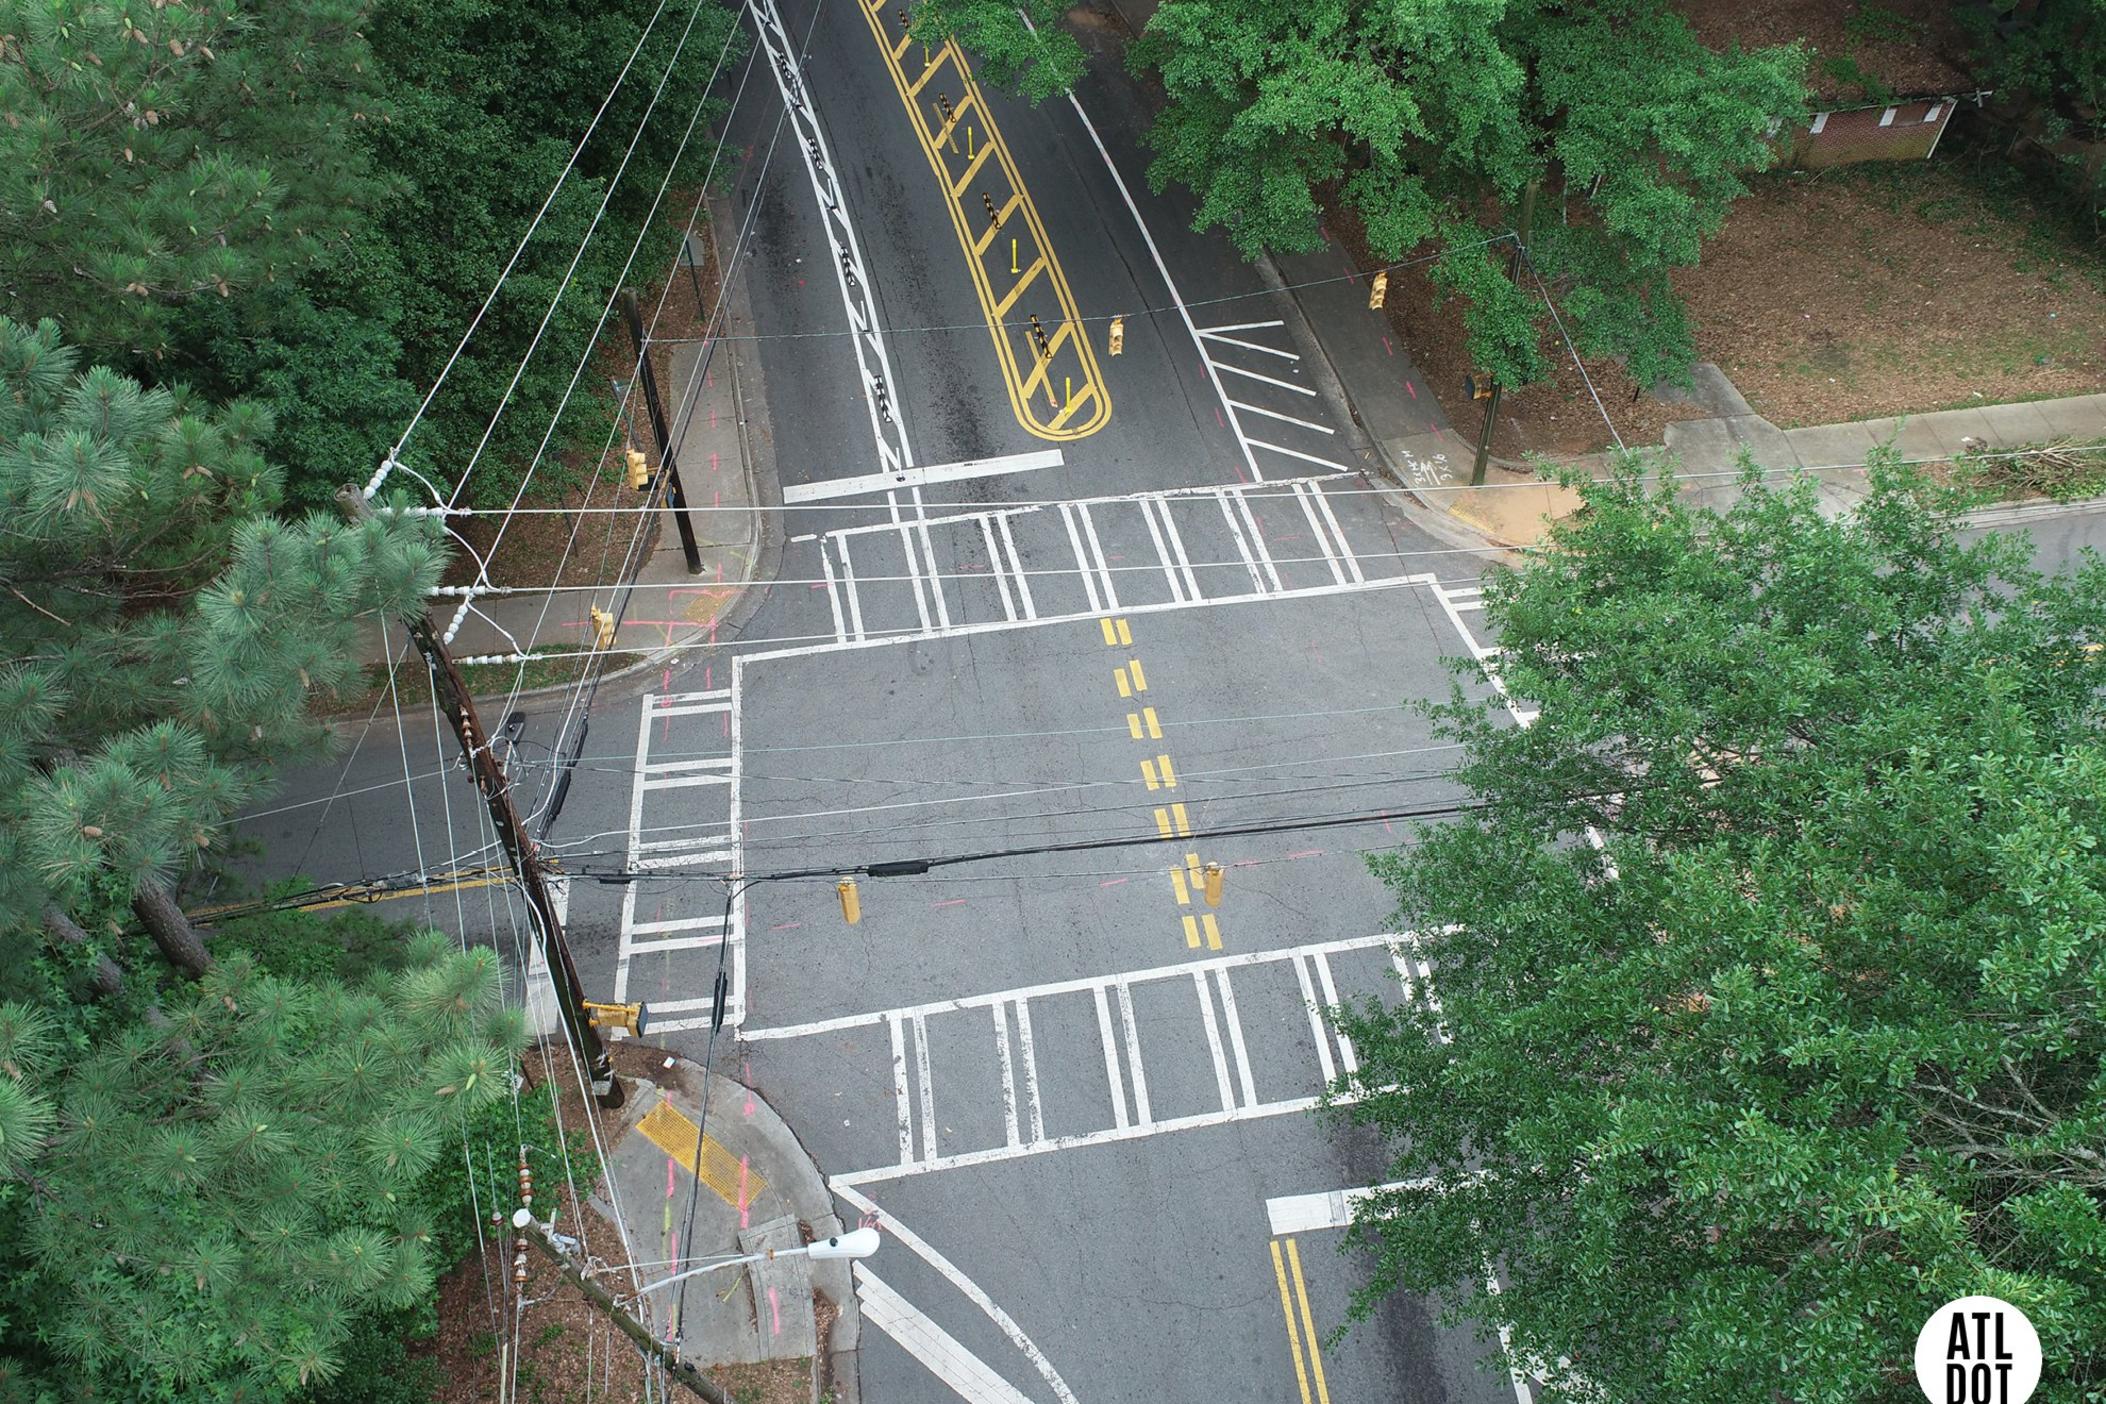 An overview of a intersection that's well painted with bike lines and cross walks. A new bill from Atlanta City Council aims to decrease traffic deaths with safer intersections and support from the Atlanta Department of Transportation.